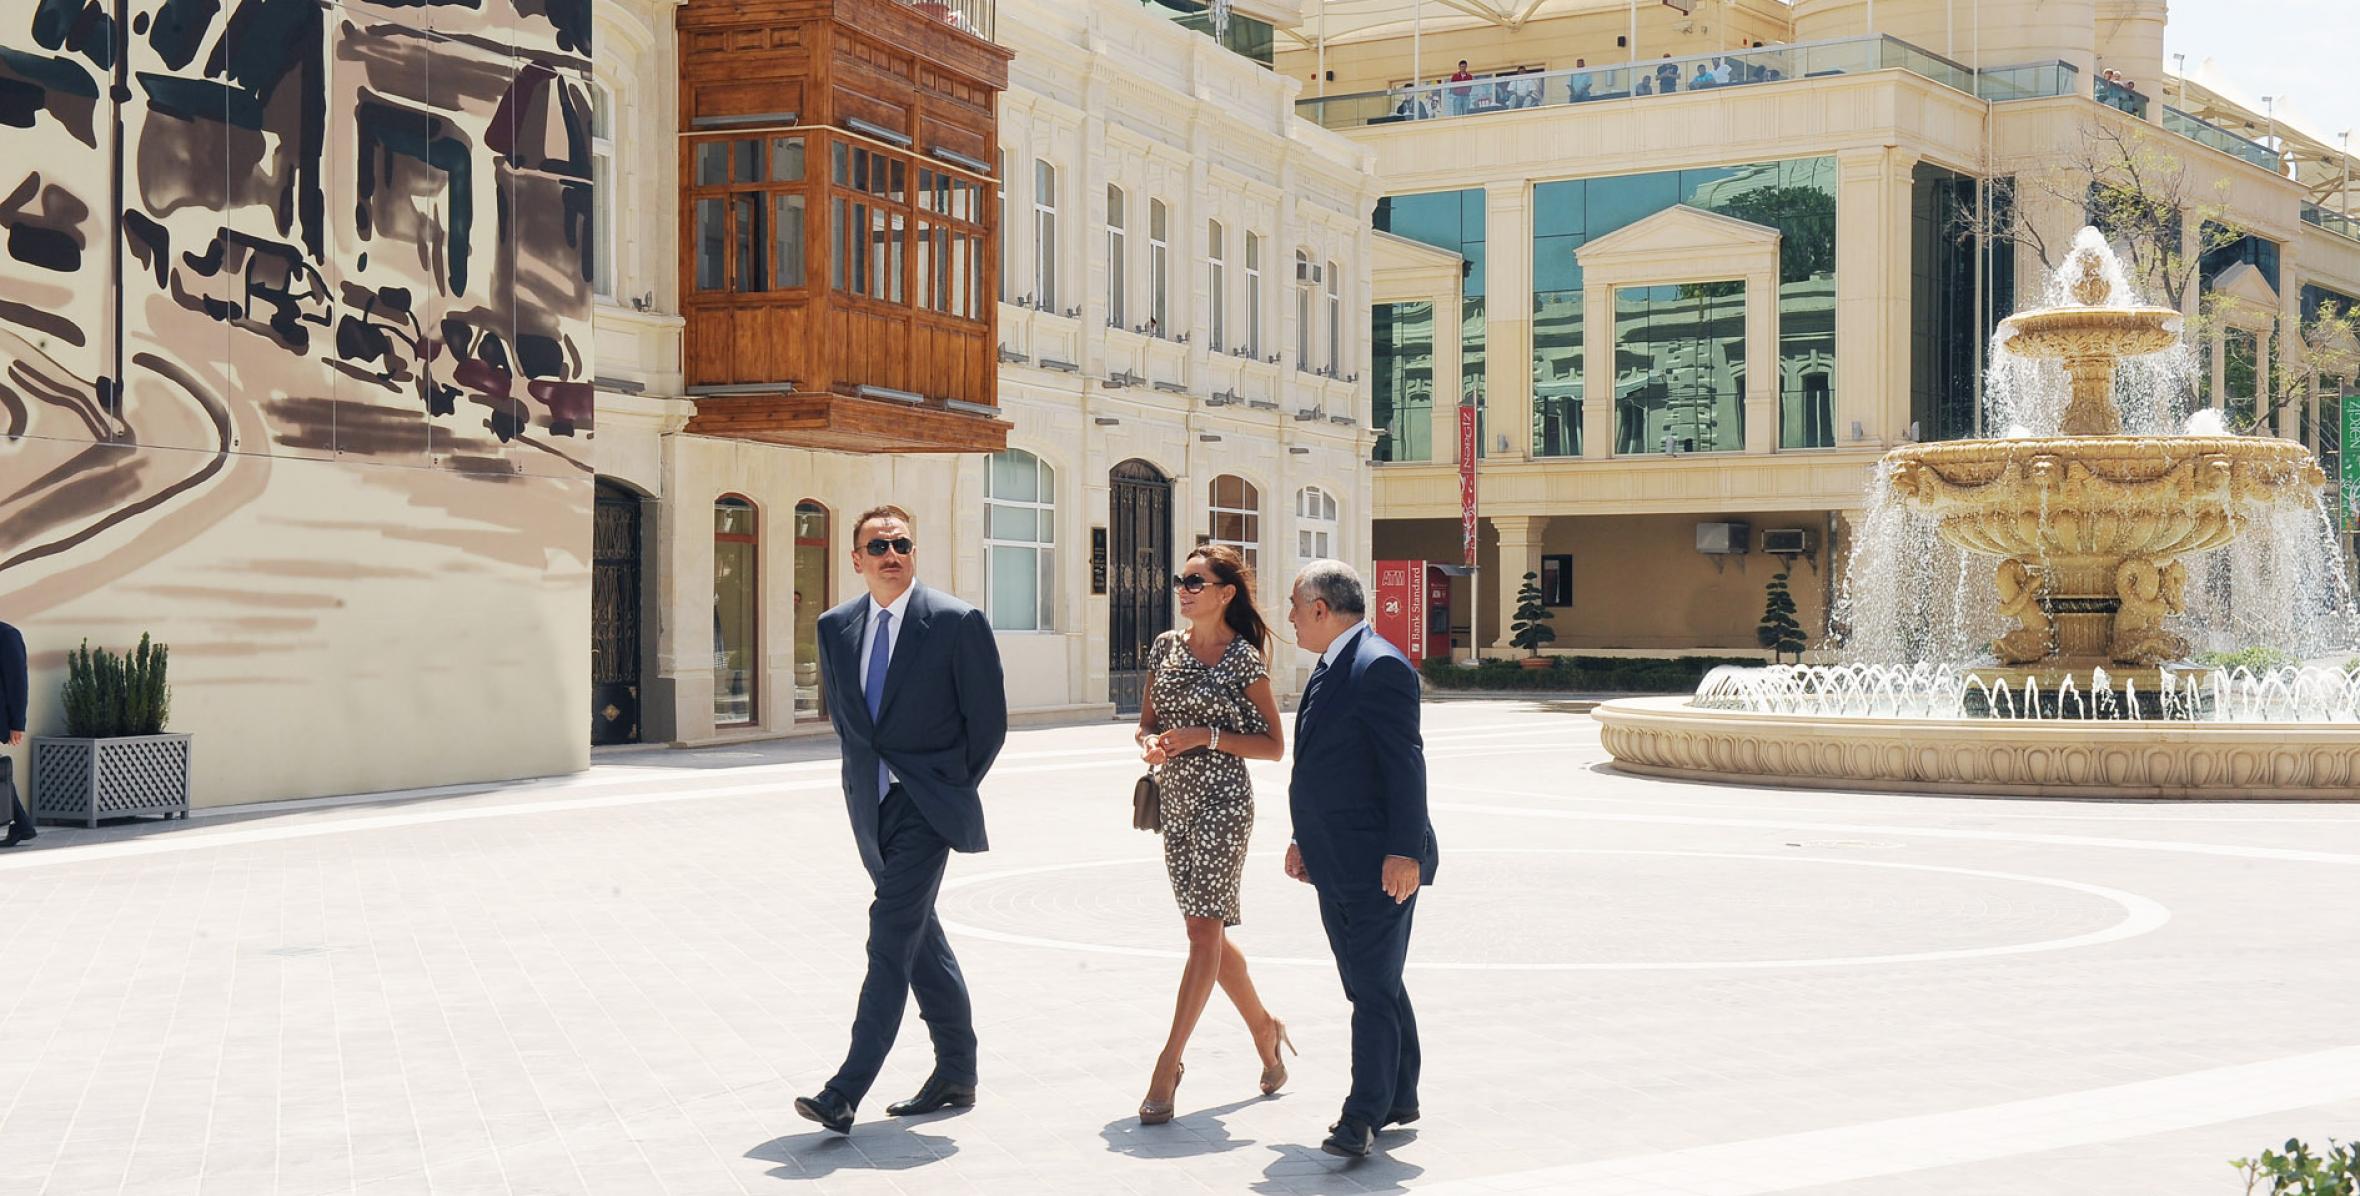 Ilham Aliyev inspected the reconstruction works in the Fountain Square / 02 July 2010